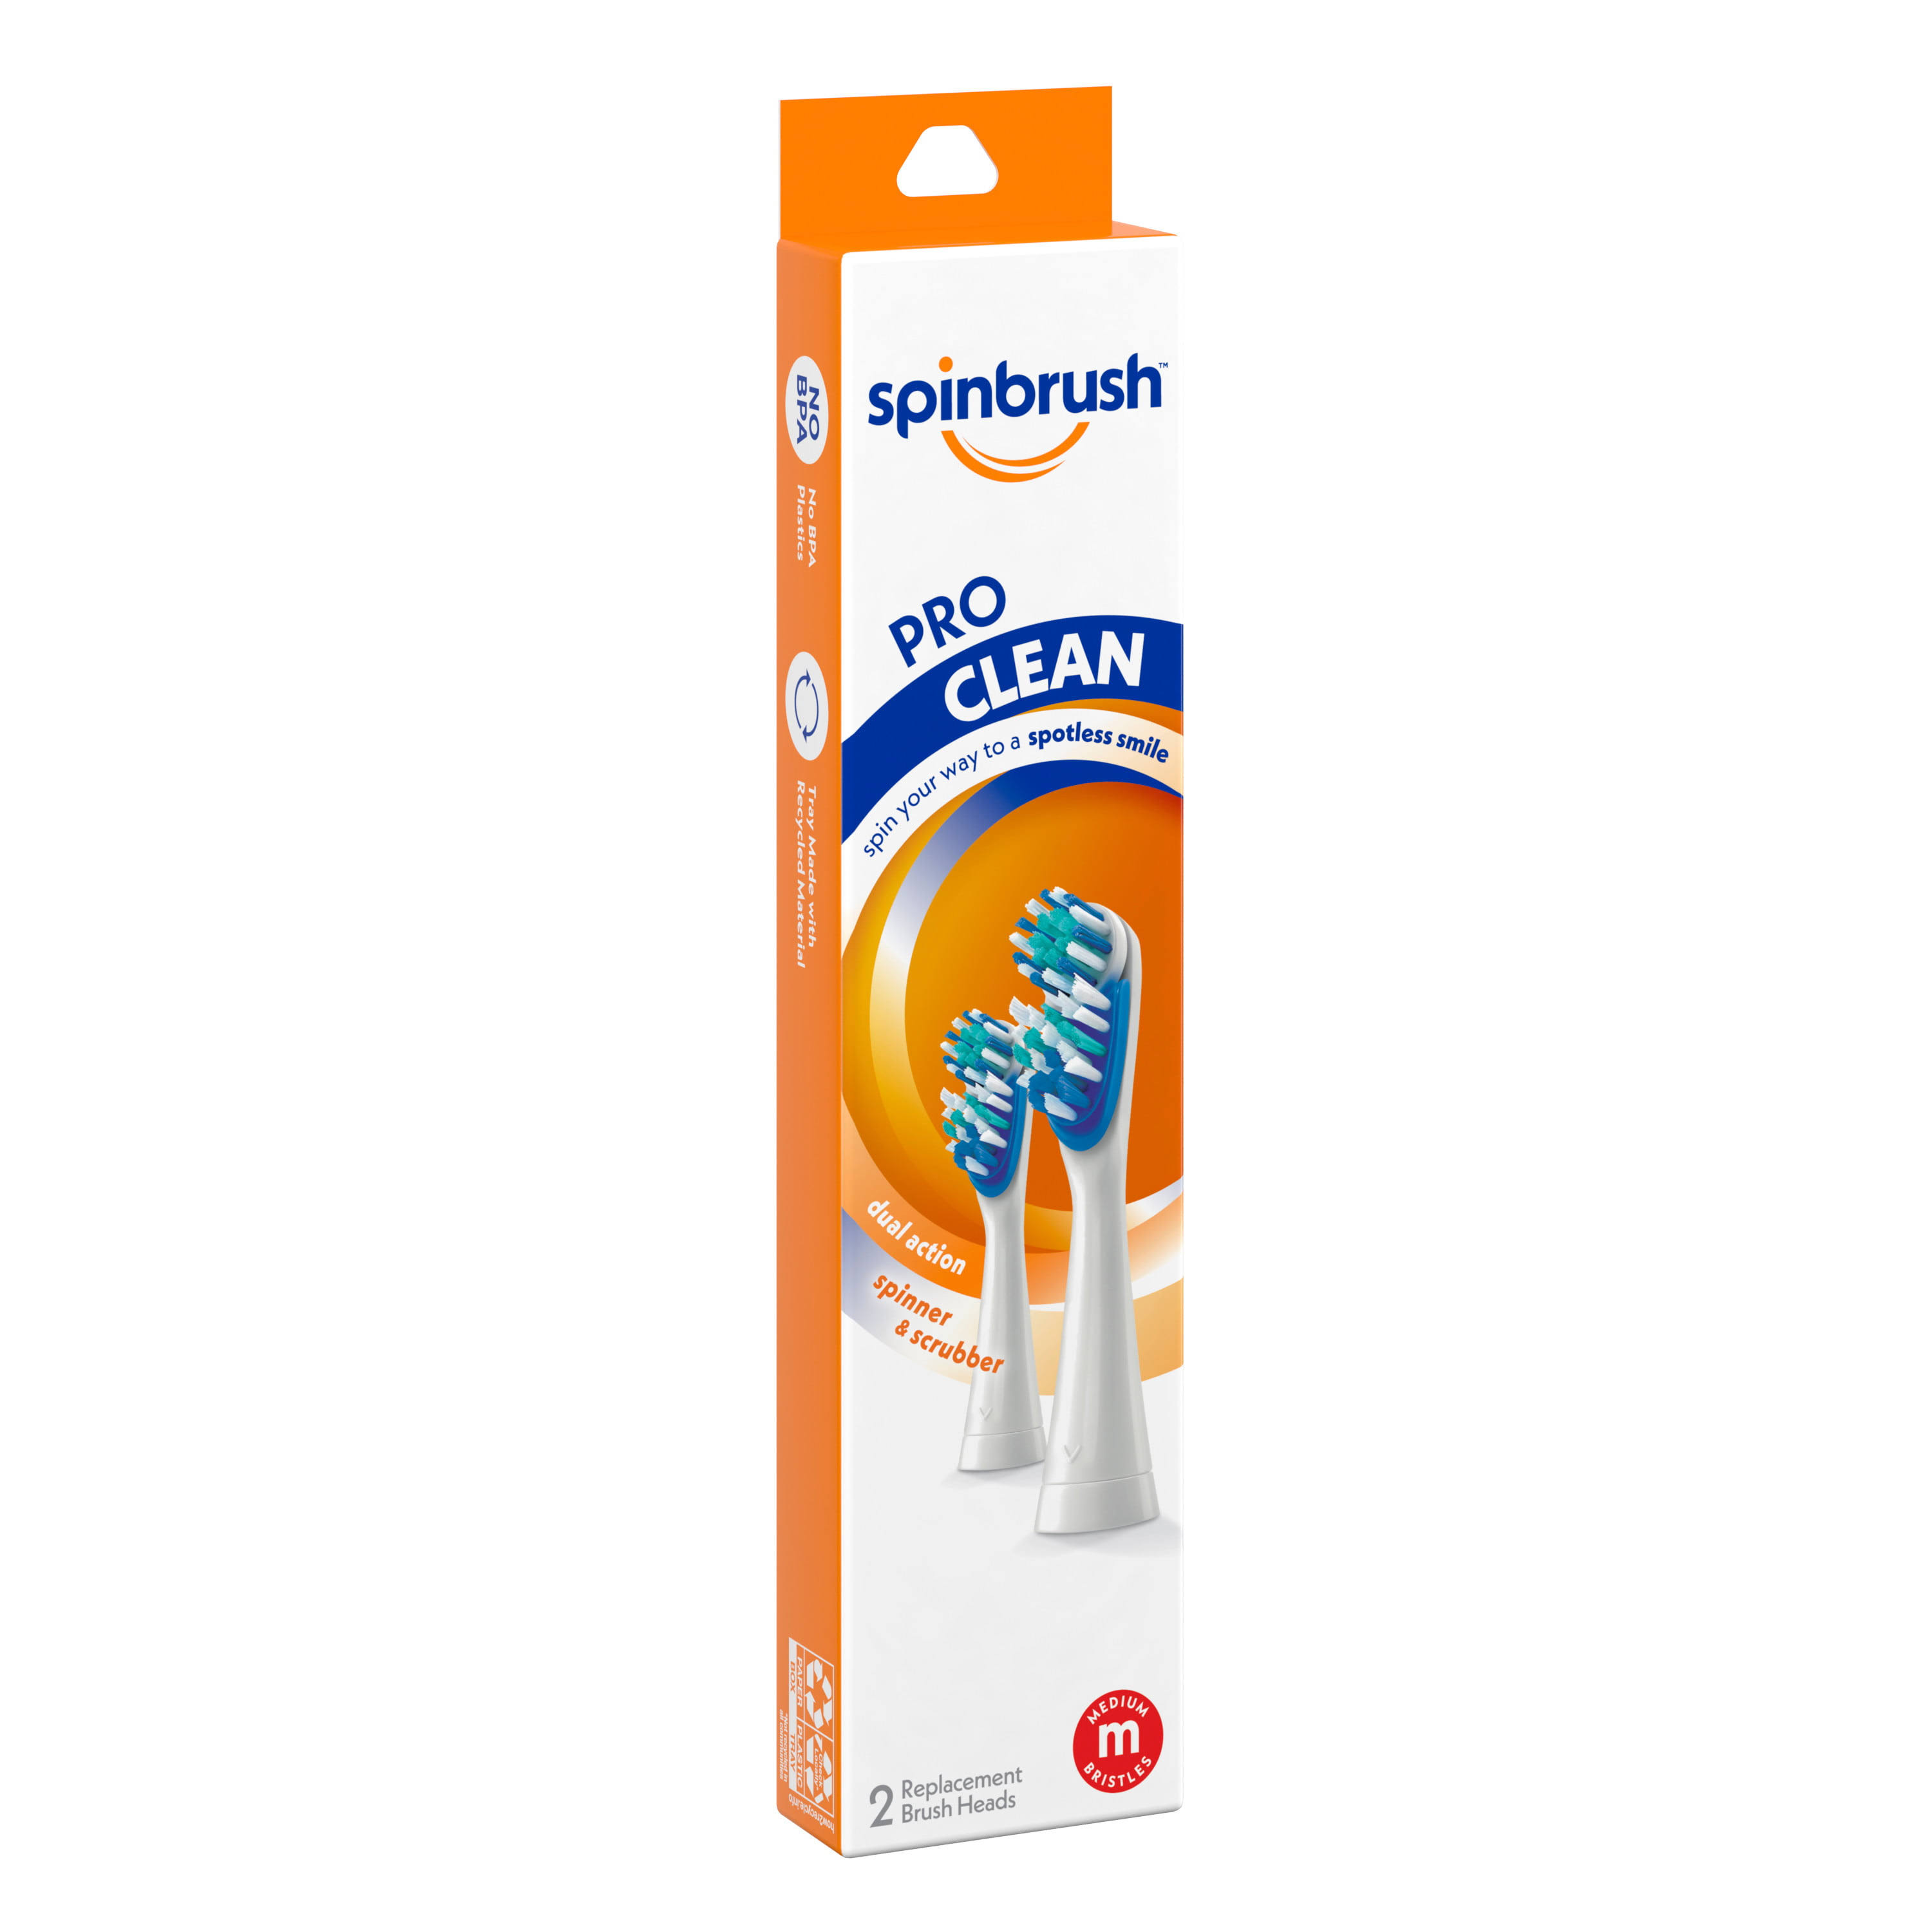 Arm and Hammer Spinbrush Pro Clean Replacement Brush Heads - Medium